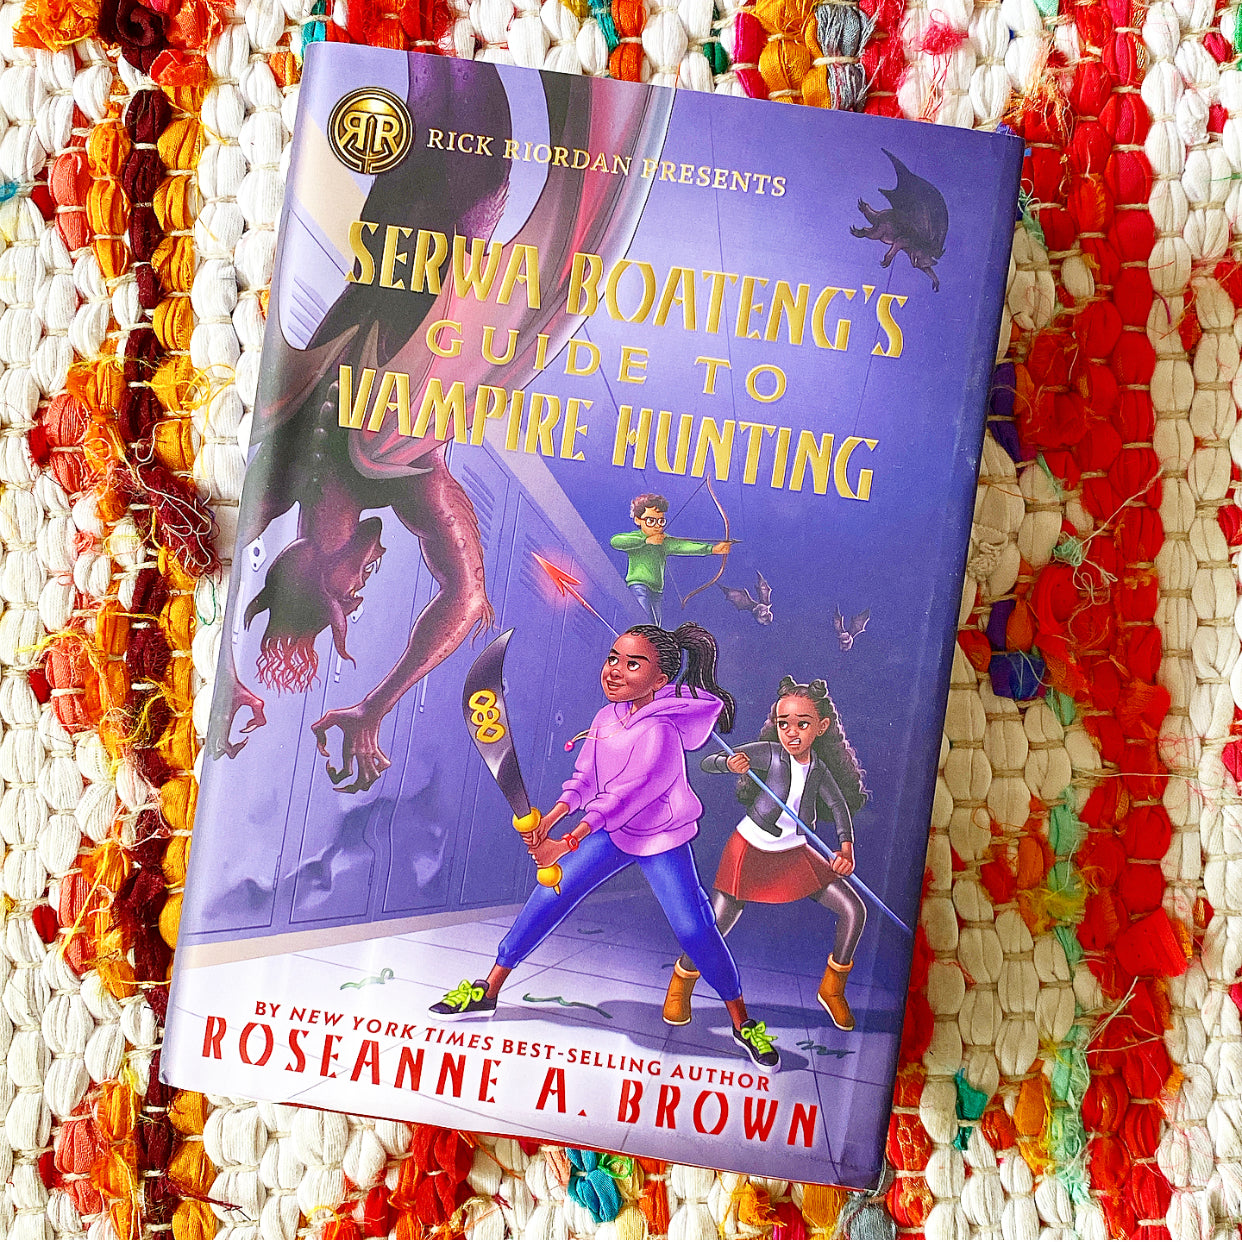 Serwa Boateng's Guide to Vampire Hunting by Roseanne A. Brown - Books